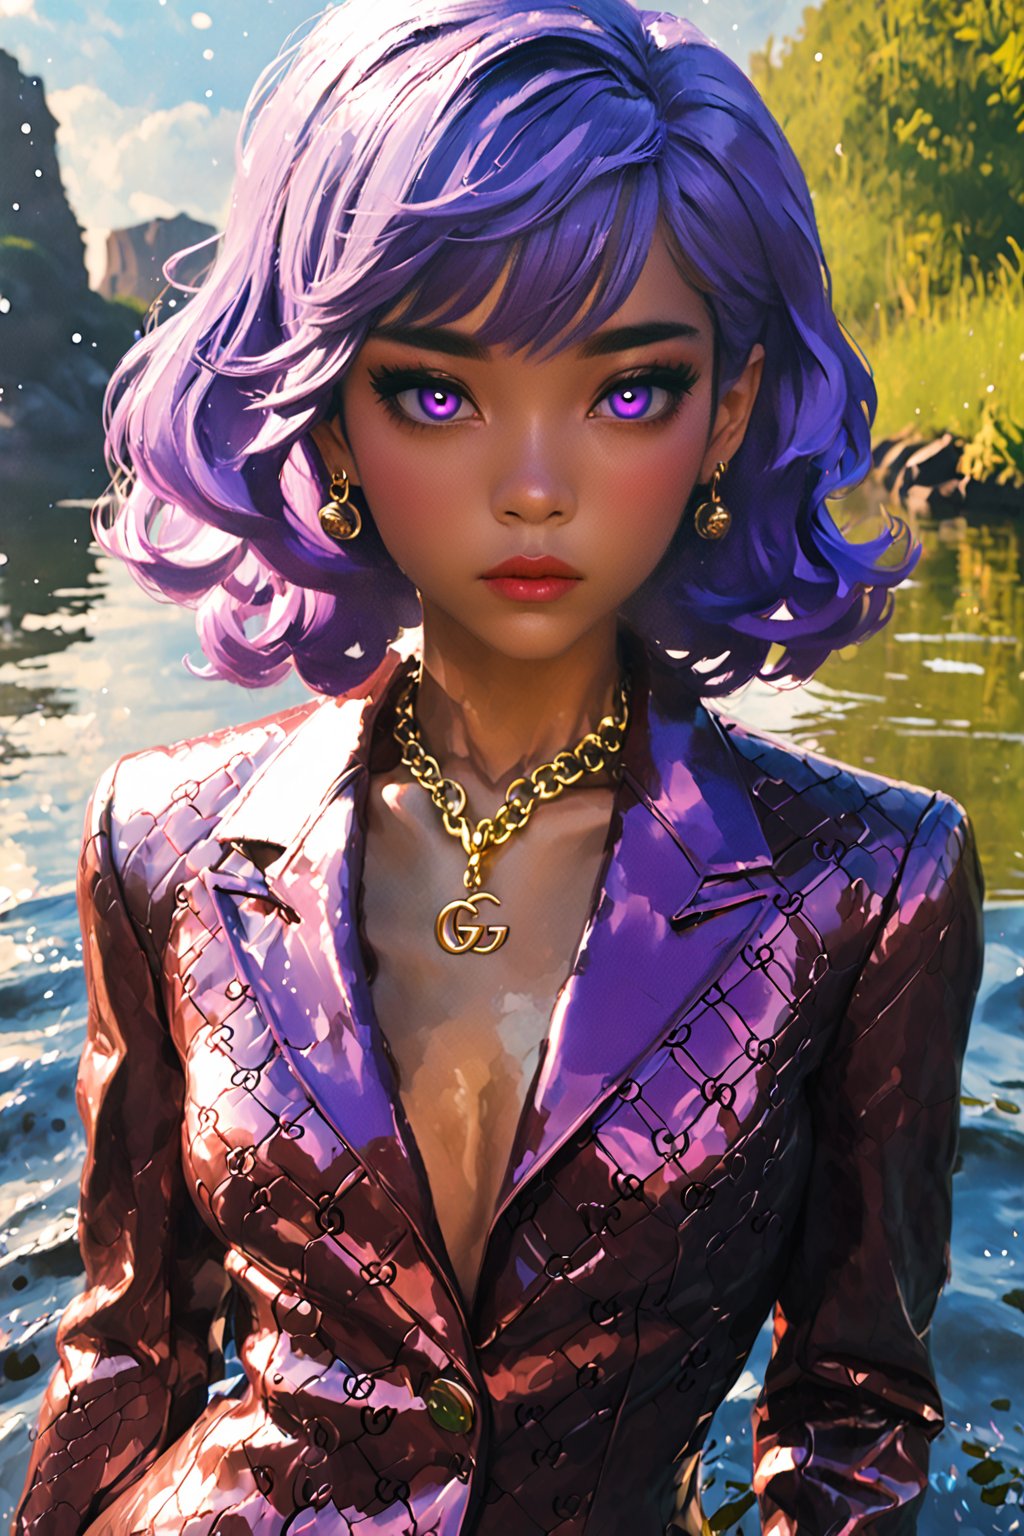 Beautiful sensual woman with perfect body but sad, sad face looking to camera, surrealistic scene, fishes in the skies, cloud skies, fishes waters, (glowing green eyes : 1.8), (wavy light-purple hair : 2), (beautiful make-up : 2), (leather and latex clothes : 1.8), (gucci patterned suit : 2), (jewelry : 2), (earings : 2), (strong female body : 2), (masterpiece), (yoongonji art : 2), (beautiful new world art : 2), (sam does art : 2), (Ilya kuvshinov art : 2), lo-fi atmosphere art, (vivid colors, high-contrast, bloom lighting), (depht of field : 2), beautiful blossom scene, sunrays lighting, 